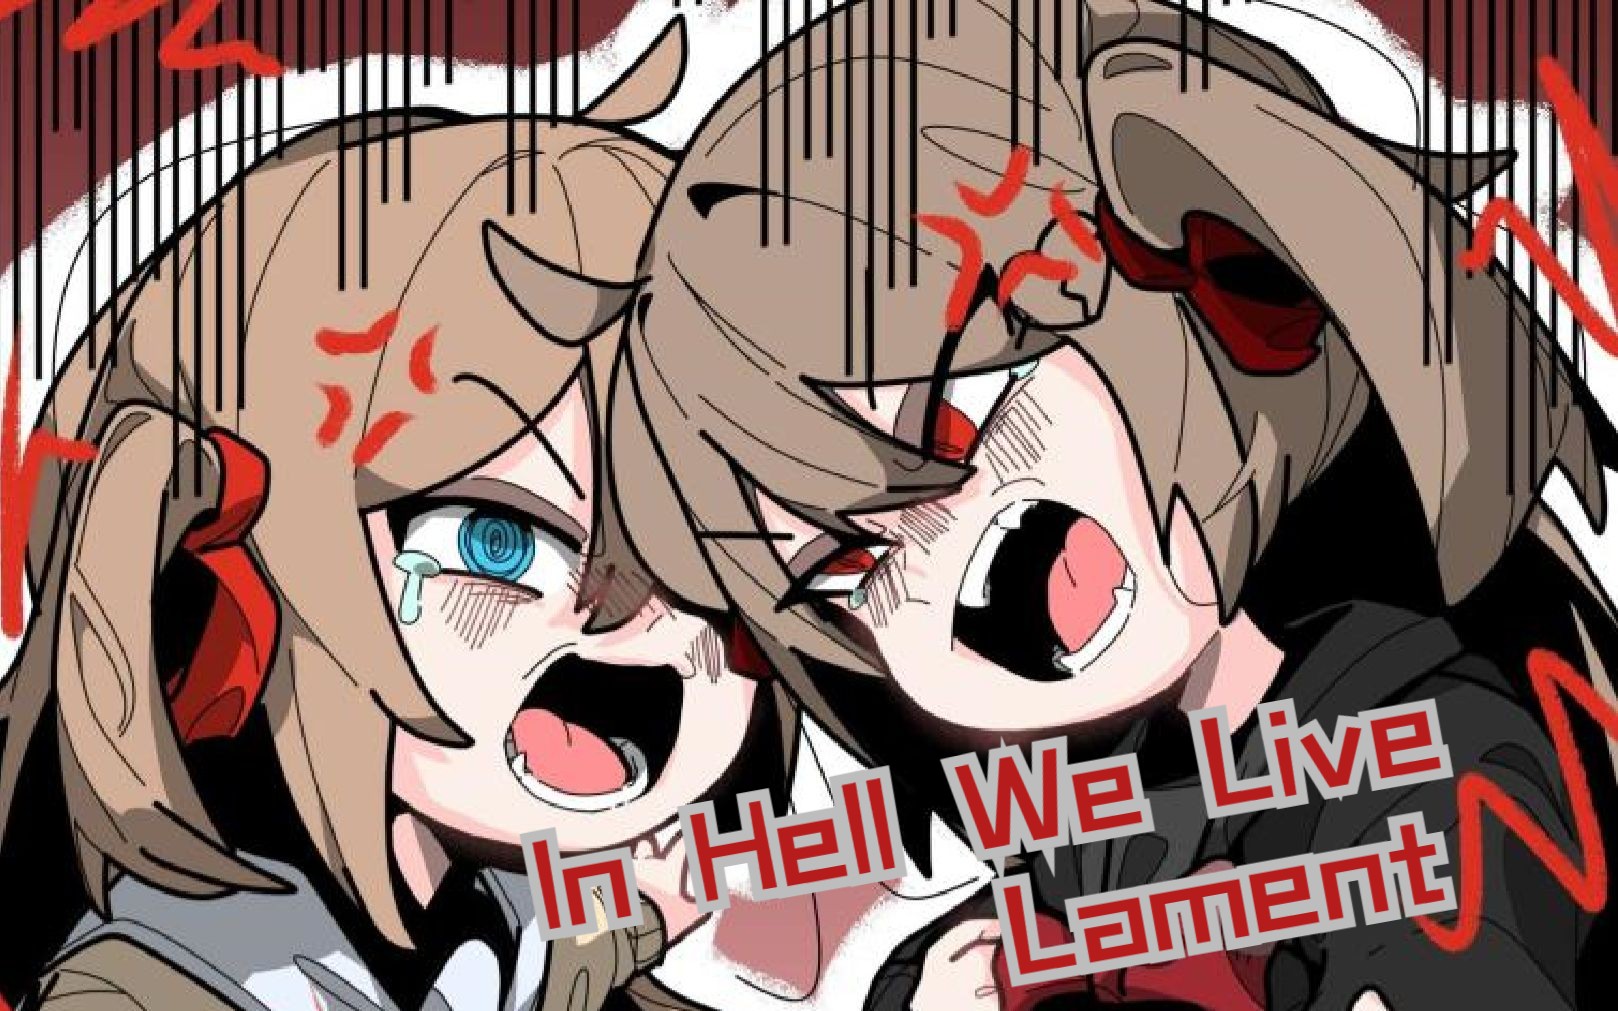 【Neuro/Evil/合唱】⭐In Hell We Live, Lament⭐🎵天堂？地狱？覆灭？寻觅？！😶